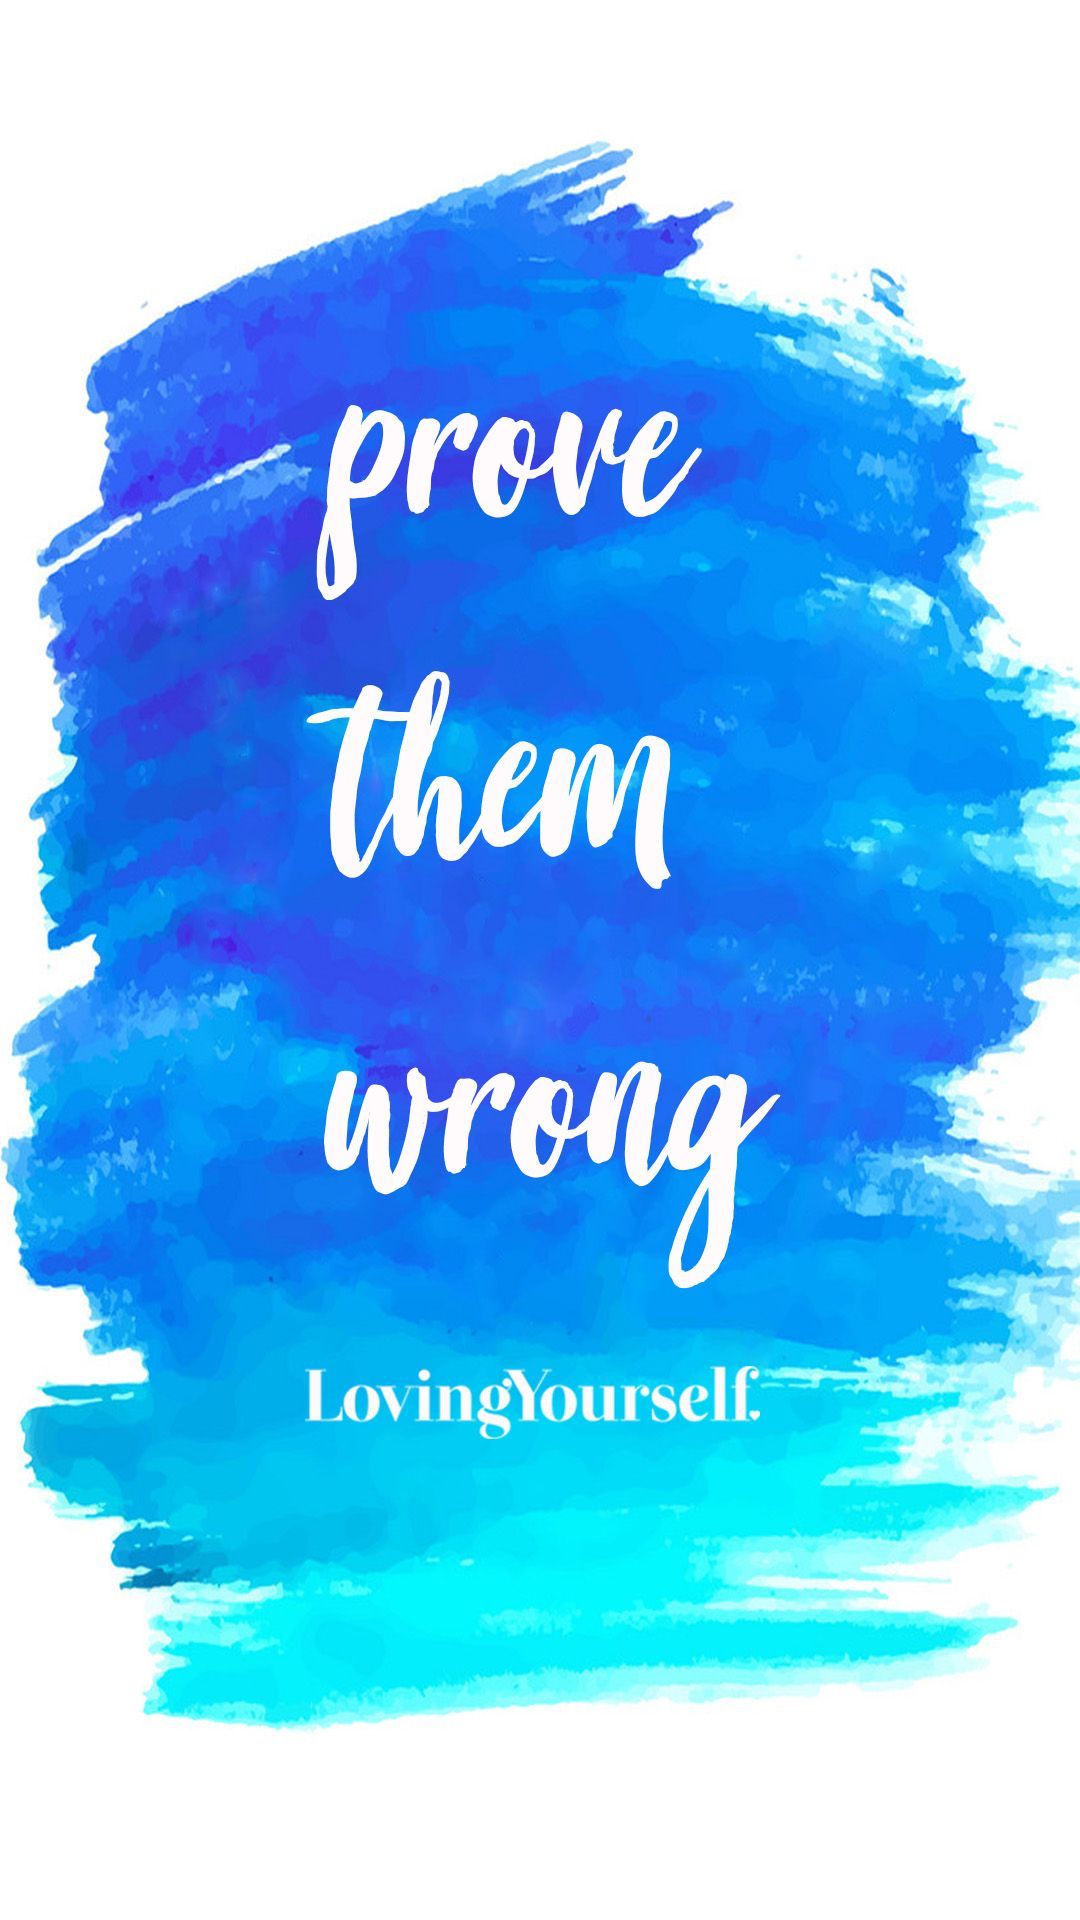 Prove them wrong wallpaper. Prove them wrong quotes, Wrong quote, Life quotes